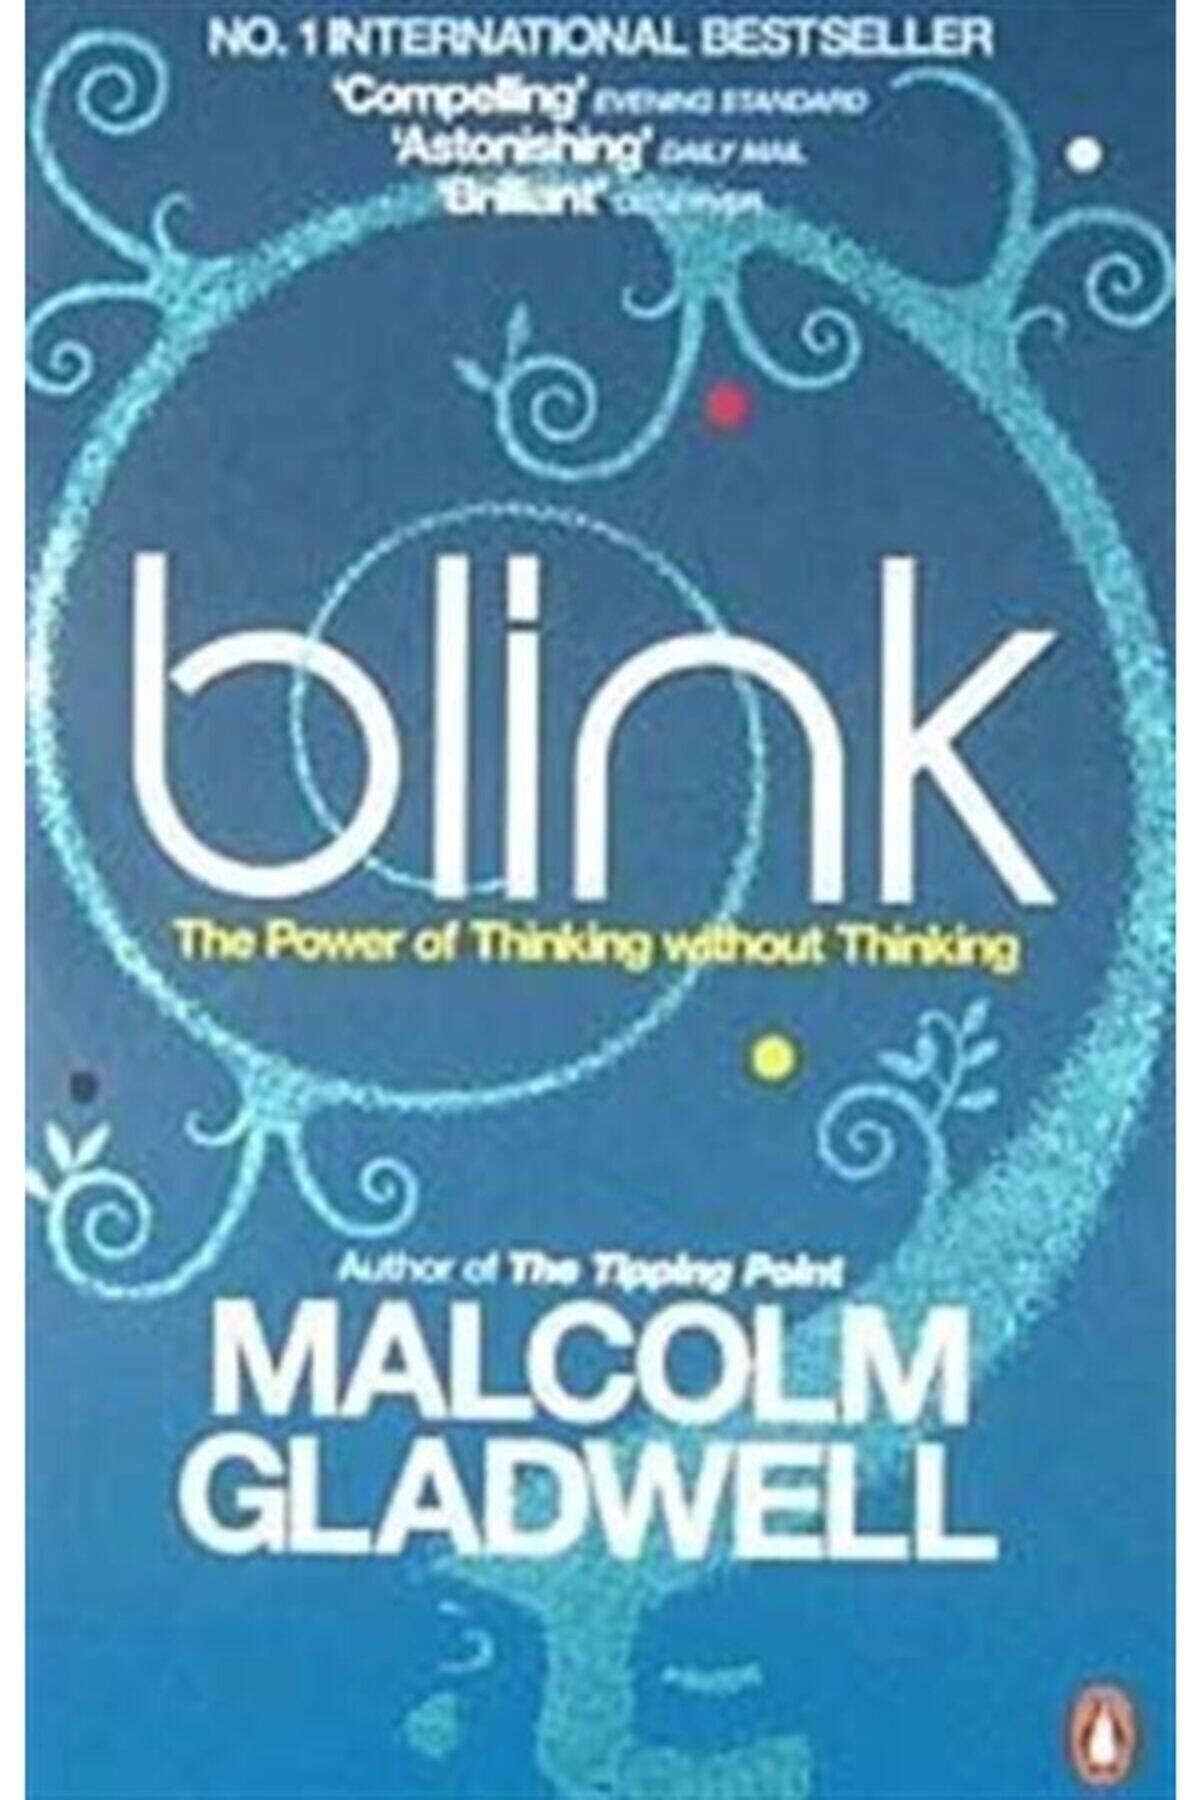 Penguin Books Blink: The Power of Thinking Without Thinking